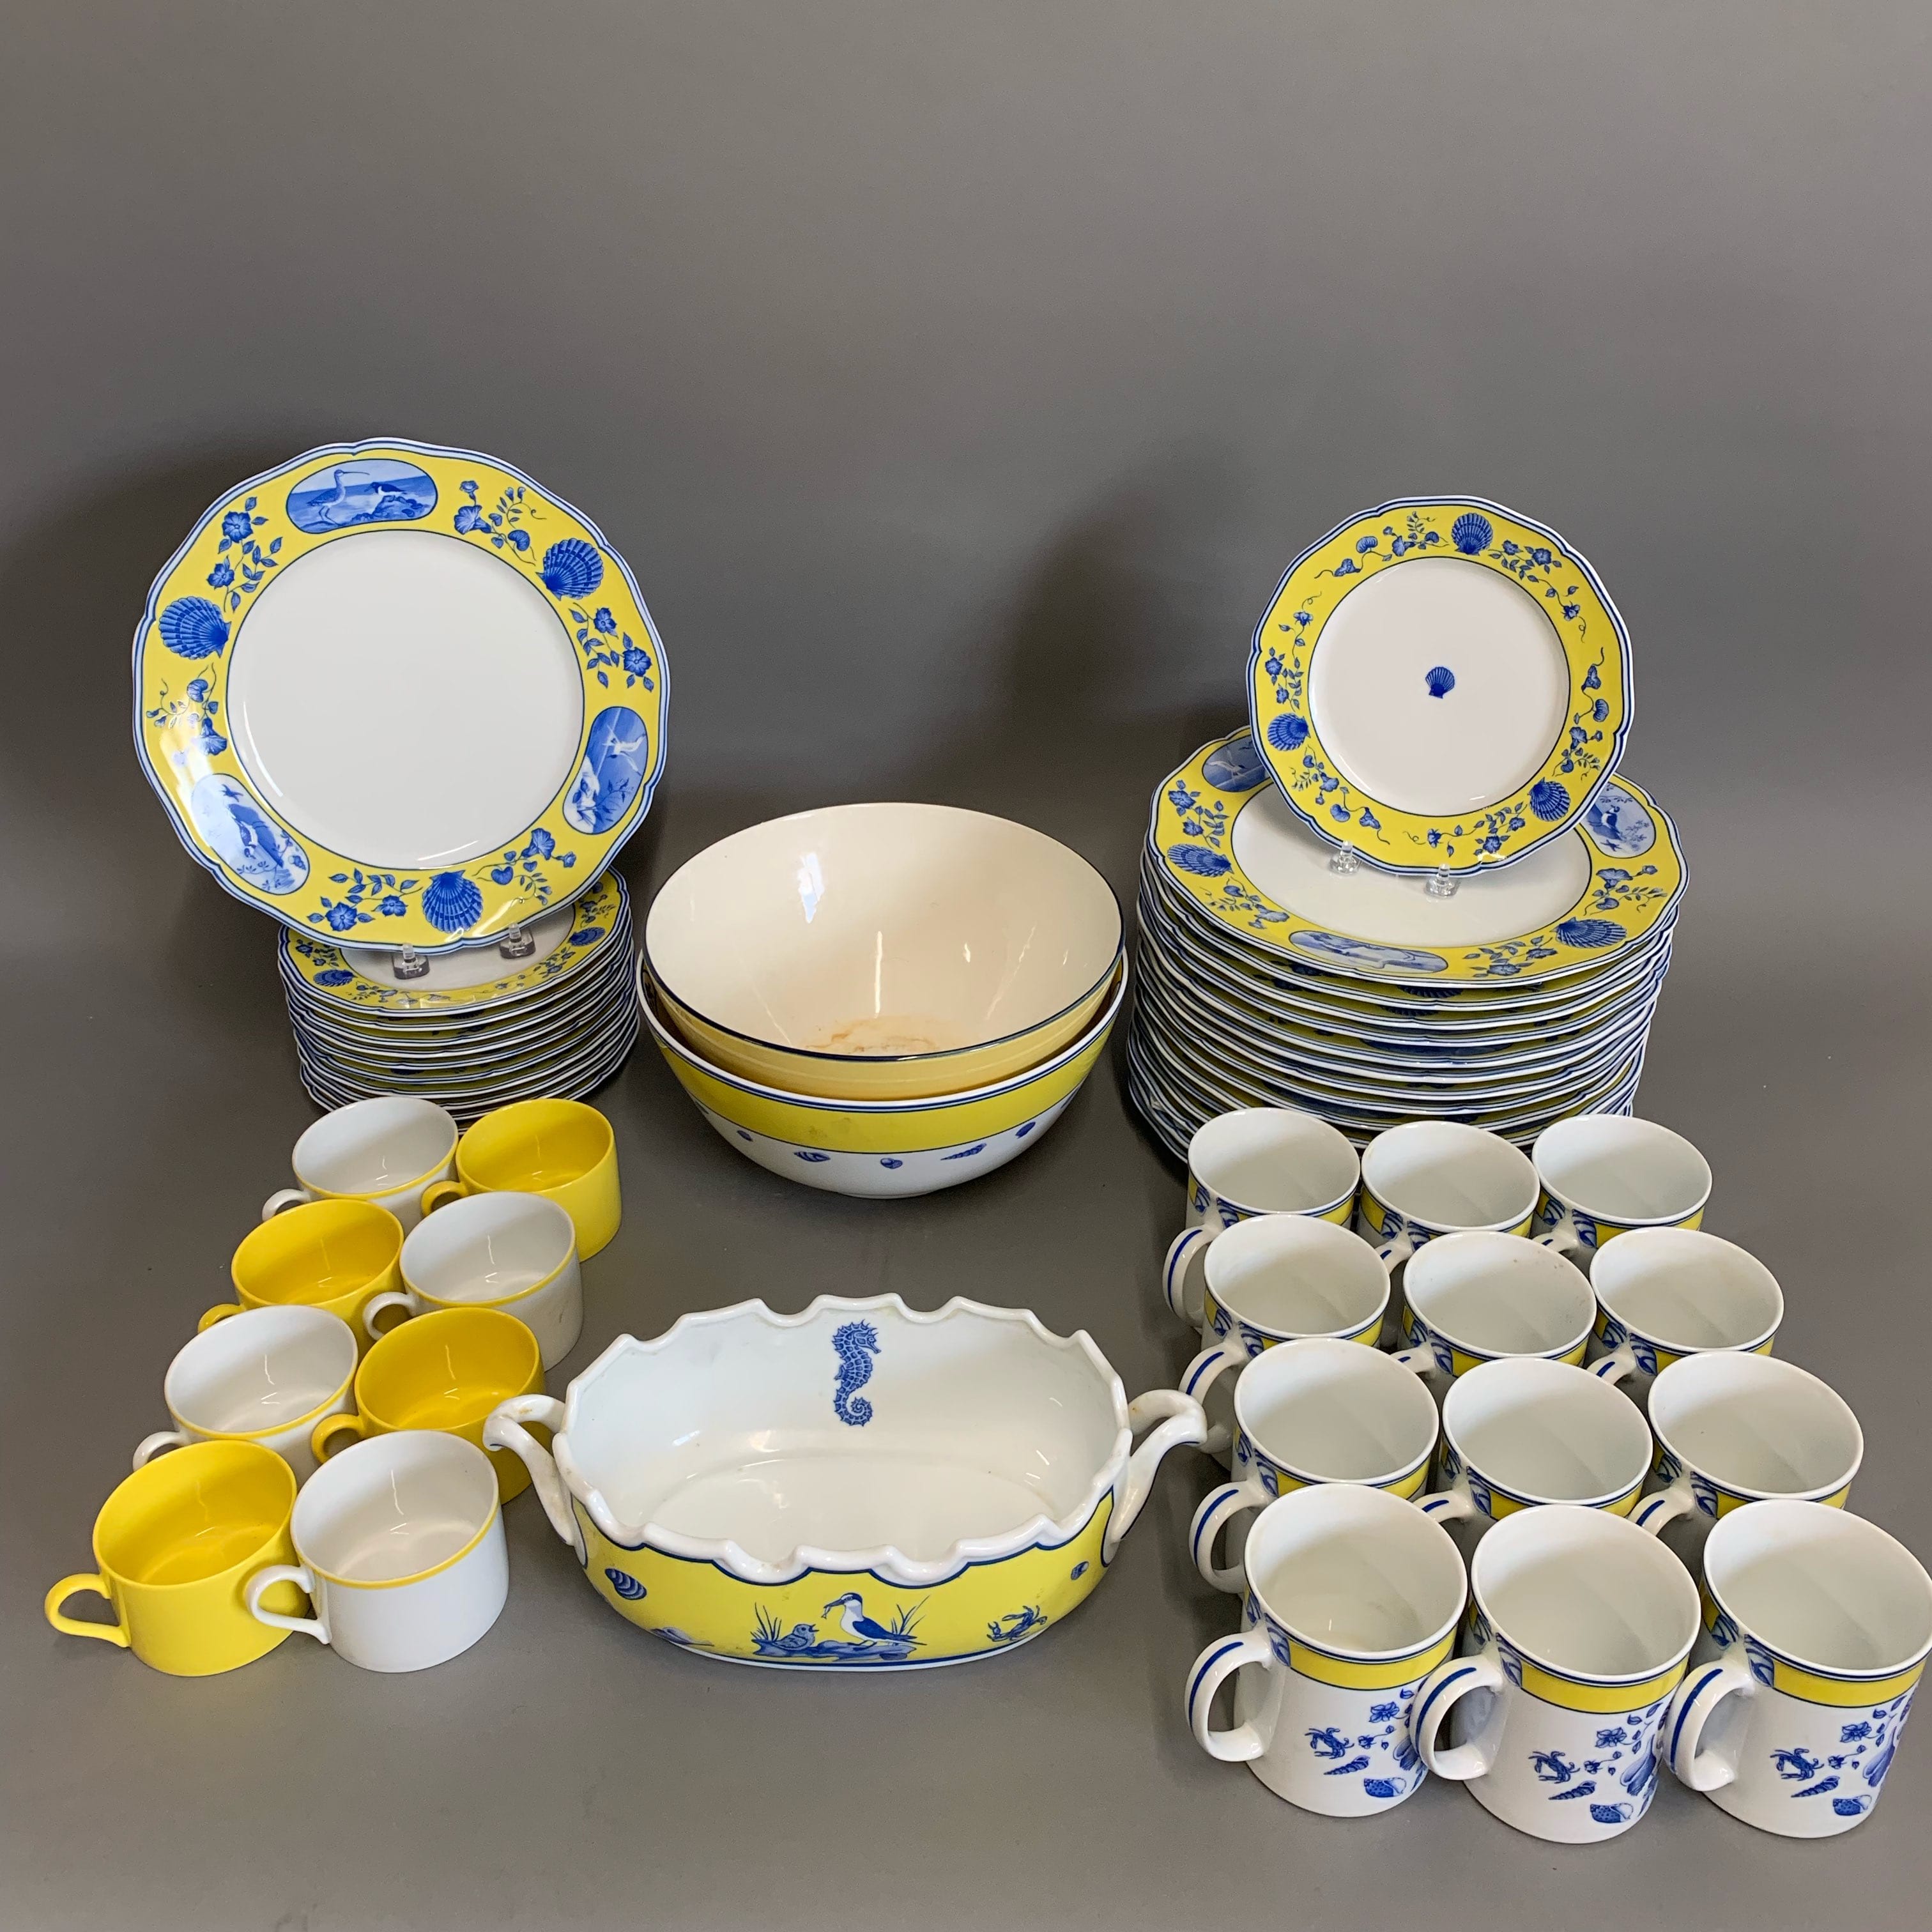 Lot 120: Set 41 pcs Chase Costa Azzura Dinner Porcelain with Bowl and Taitu Uno Mugs